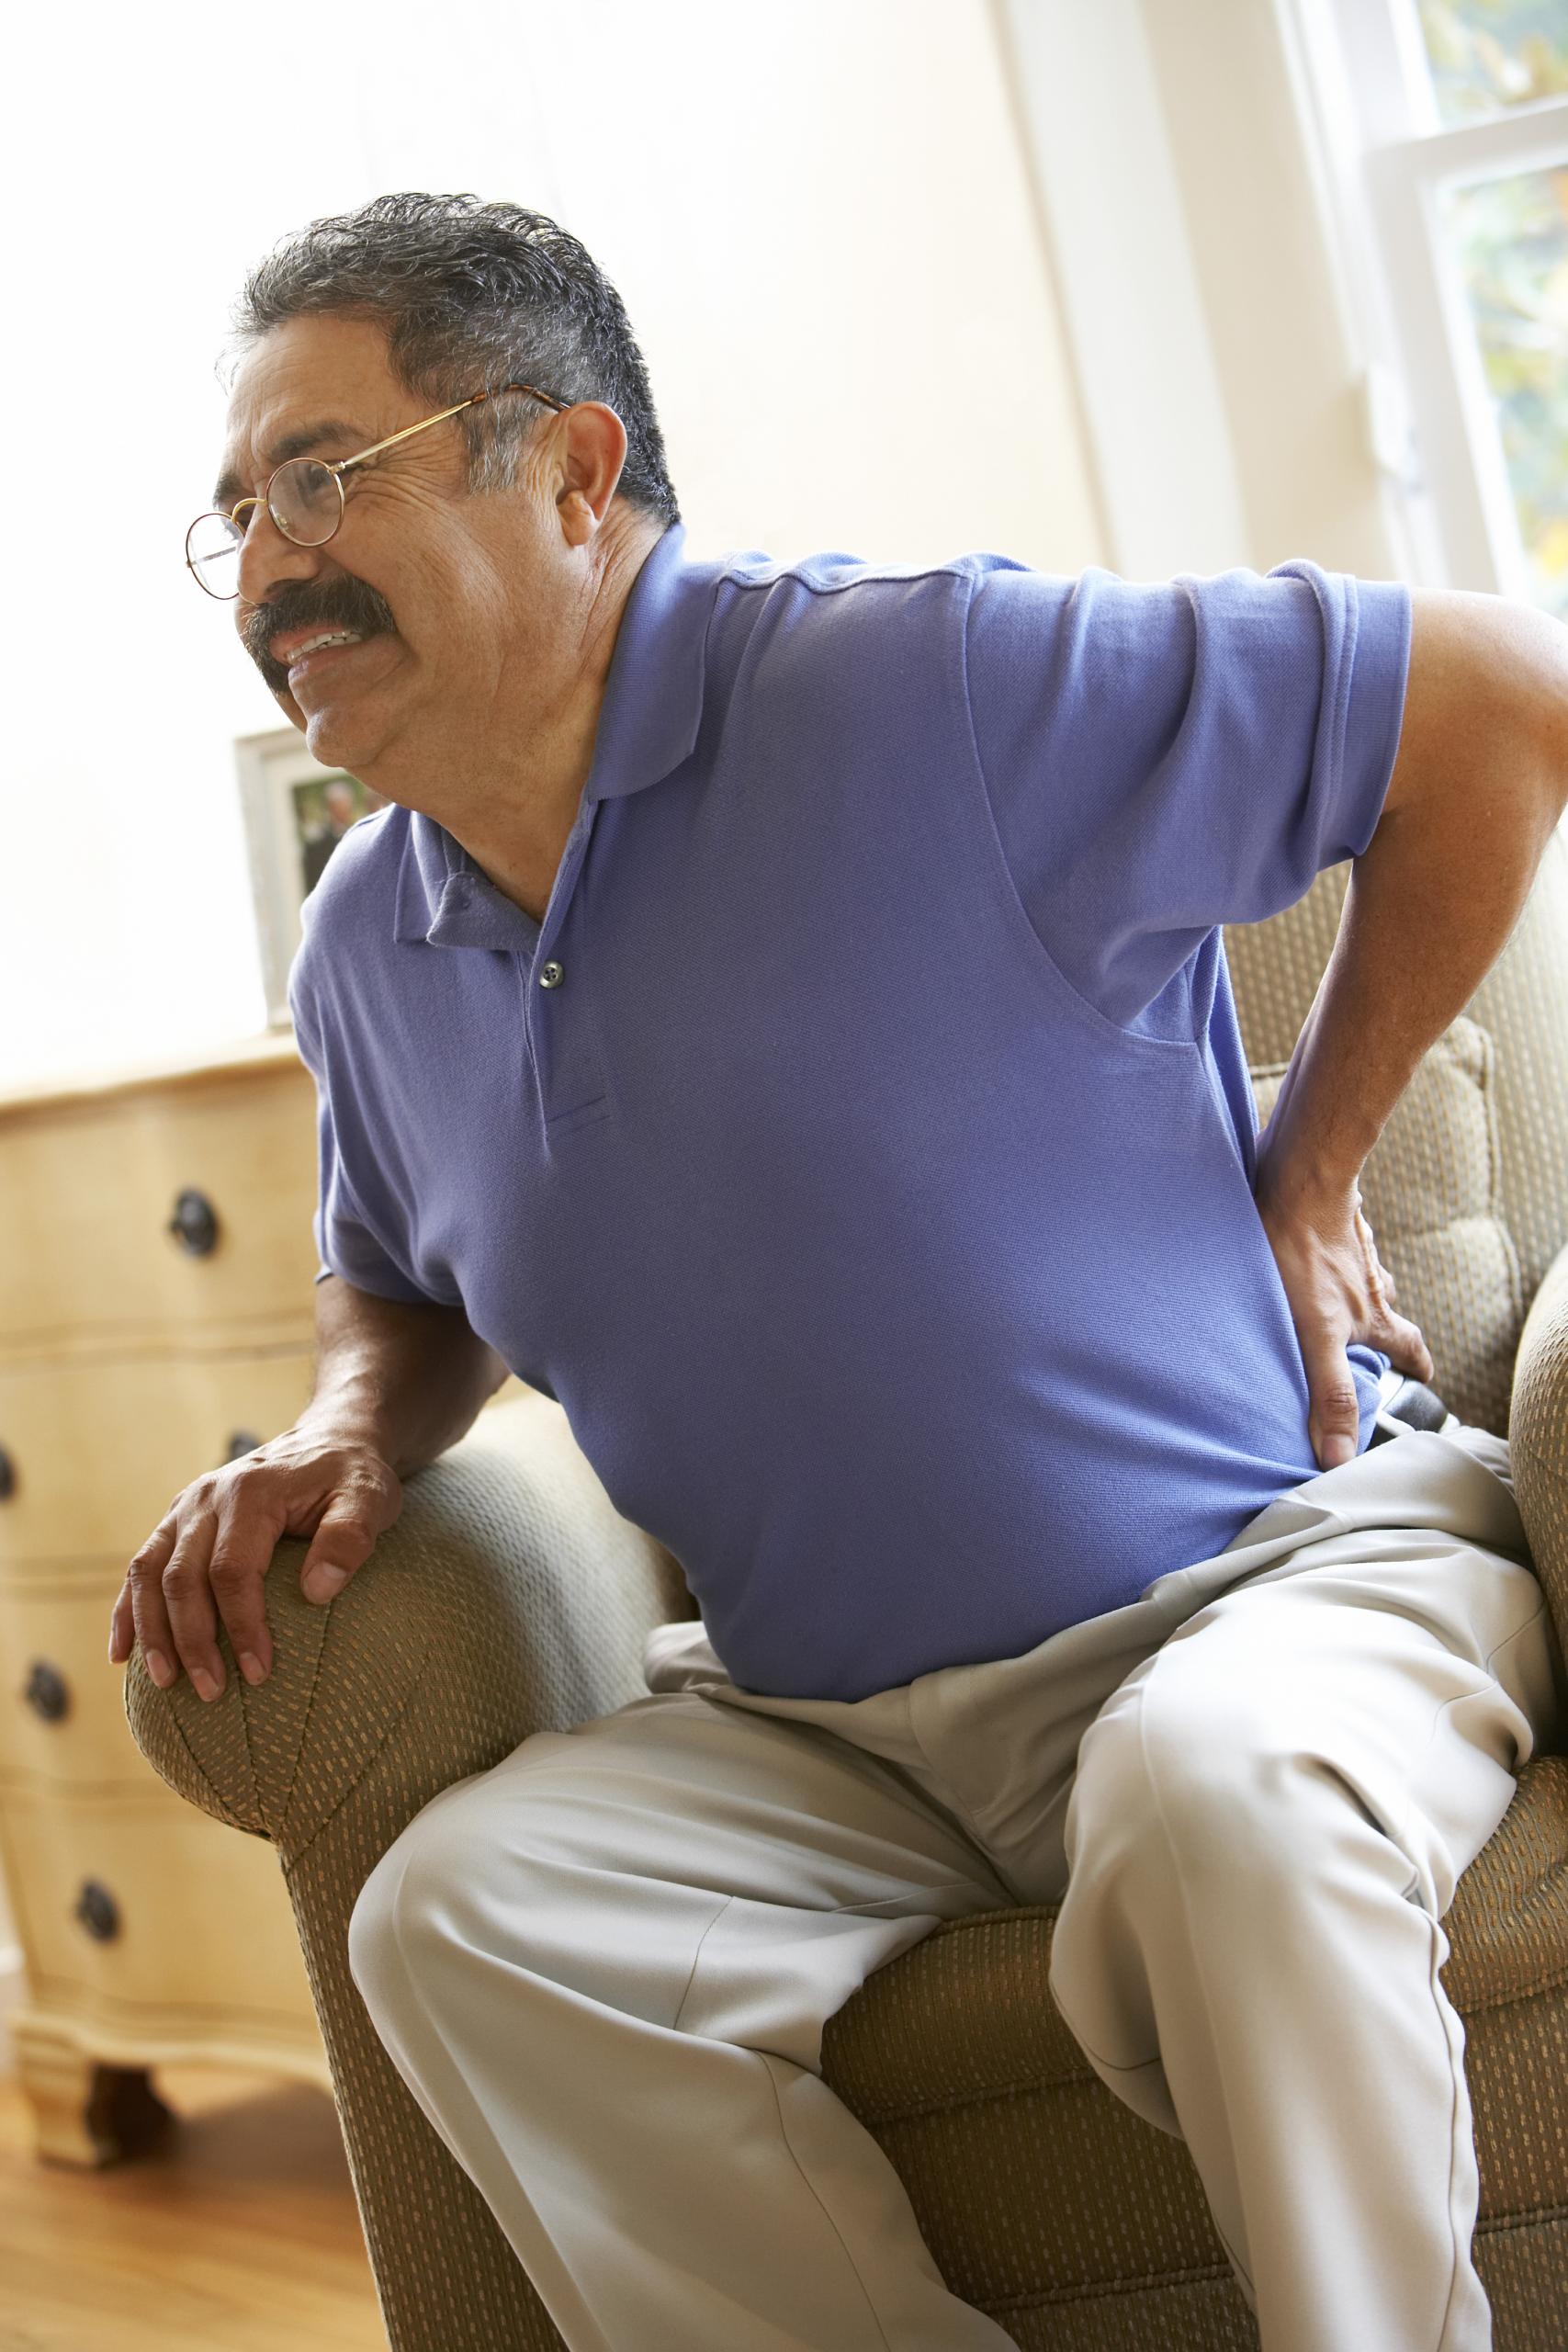 a man suffering from severe sciatica sitting on chair 